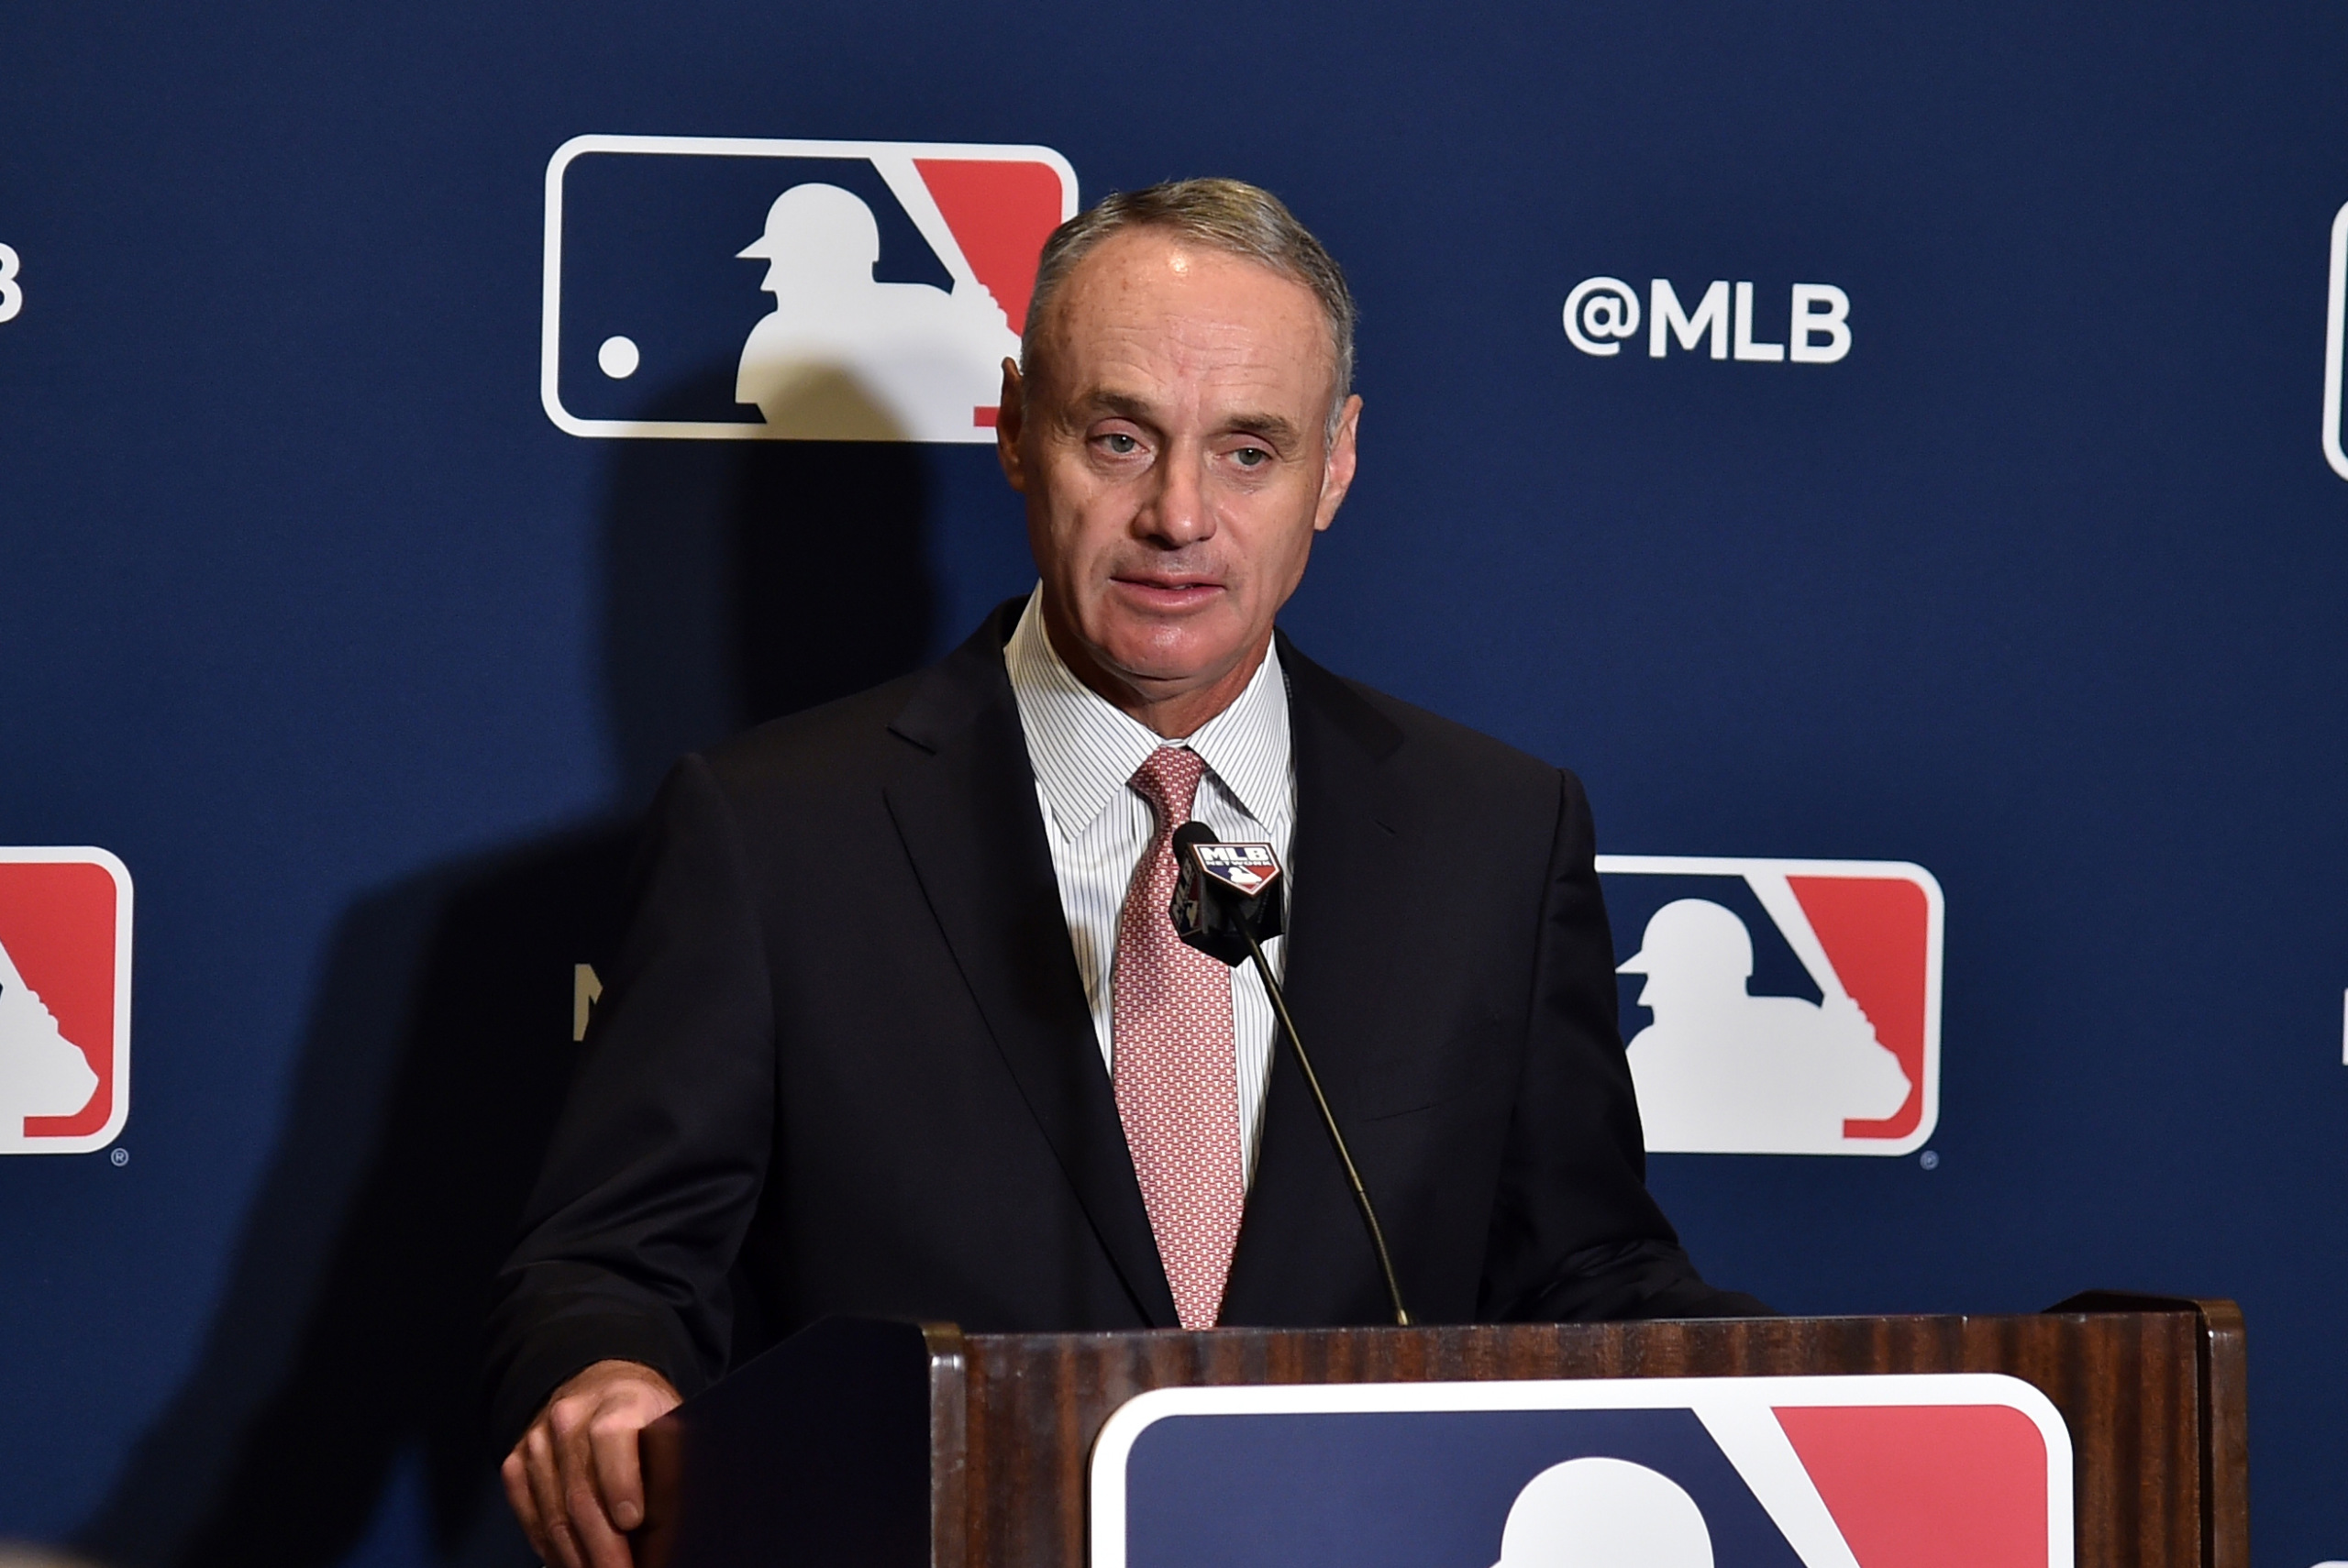 Rob Manfred: A Fanless 2021 MLB Season Would be ‘Economically Devastating’